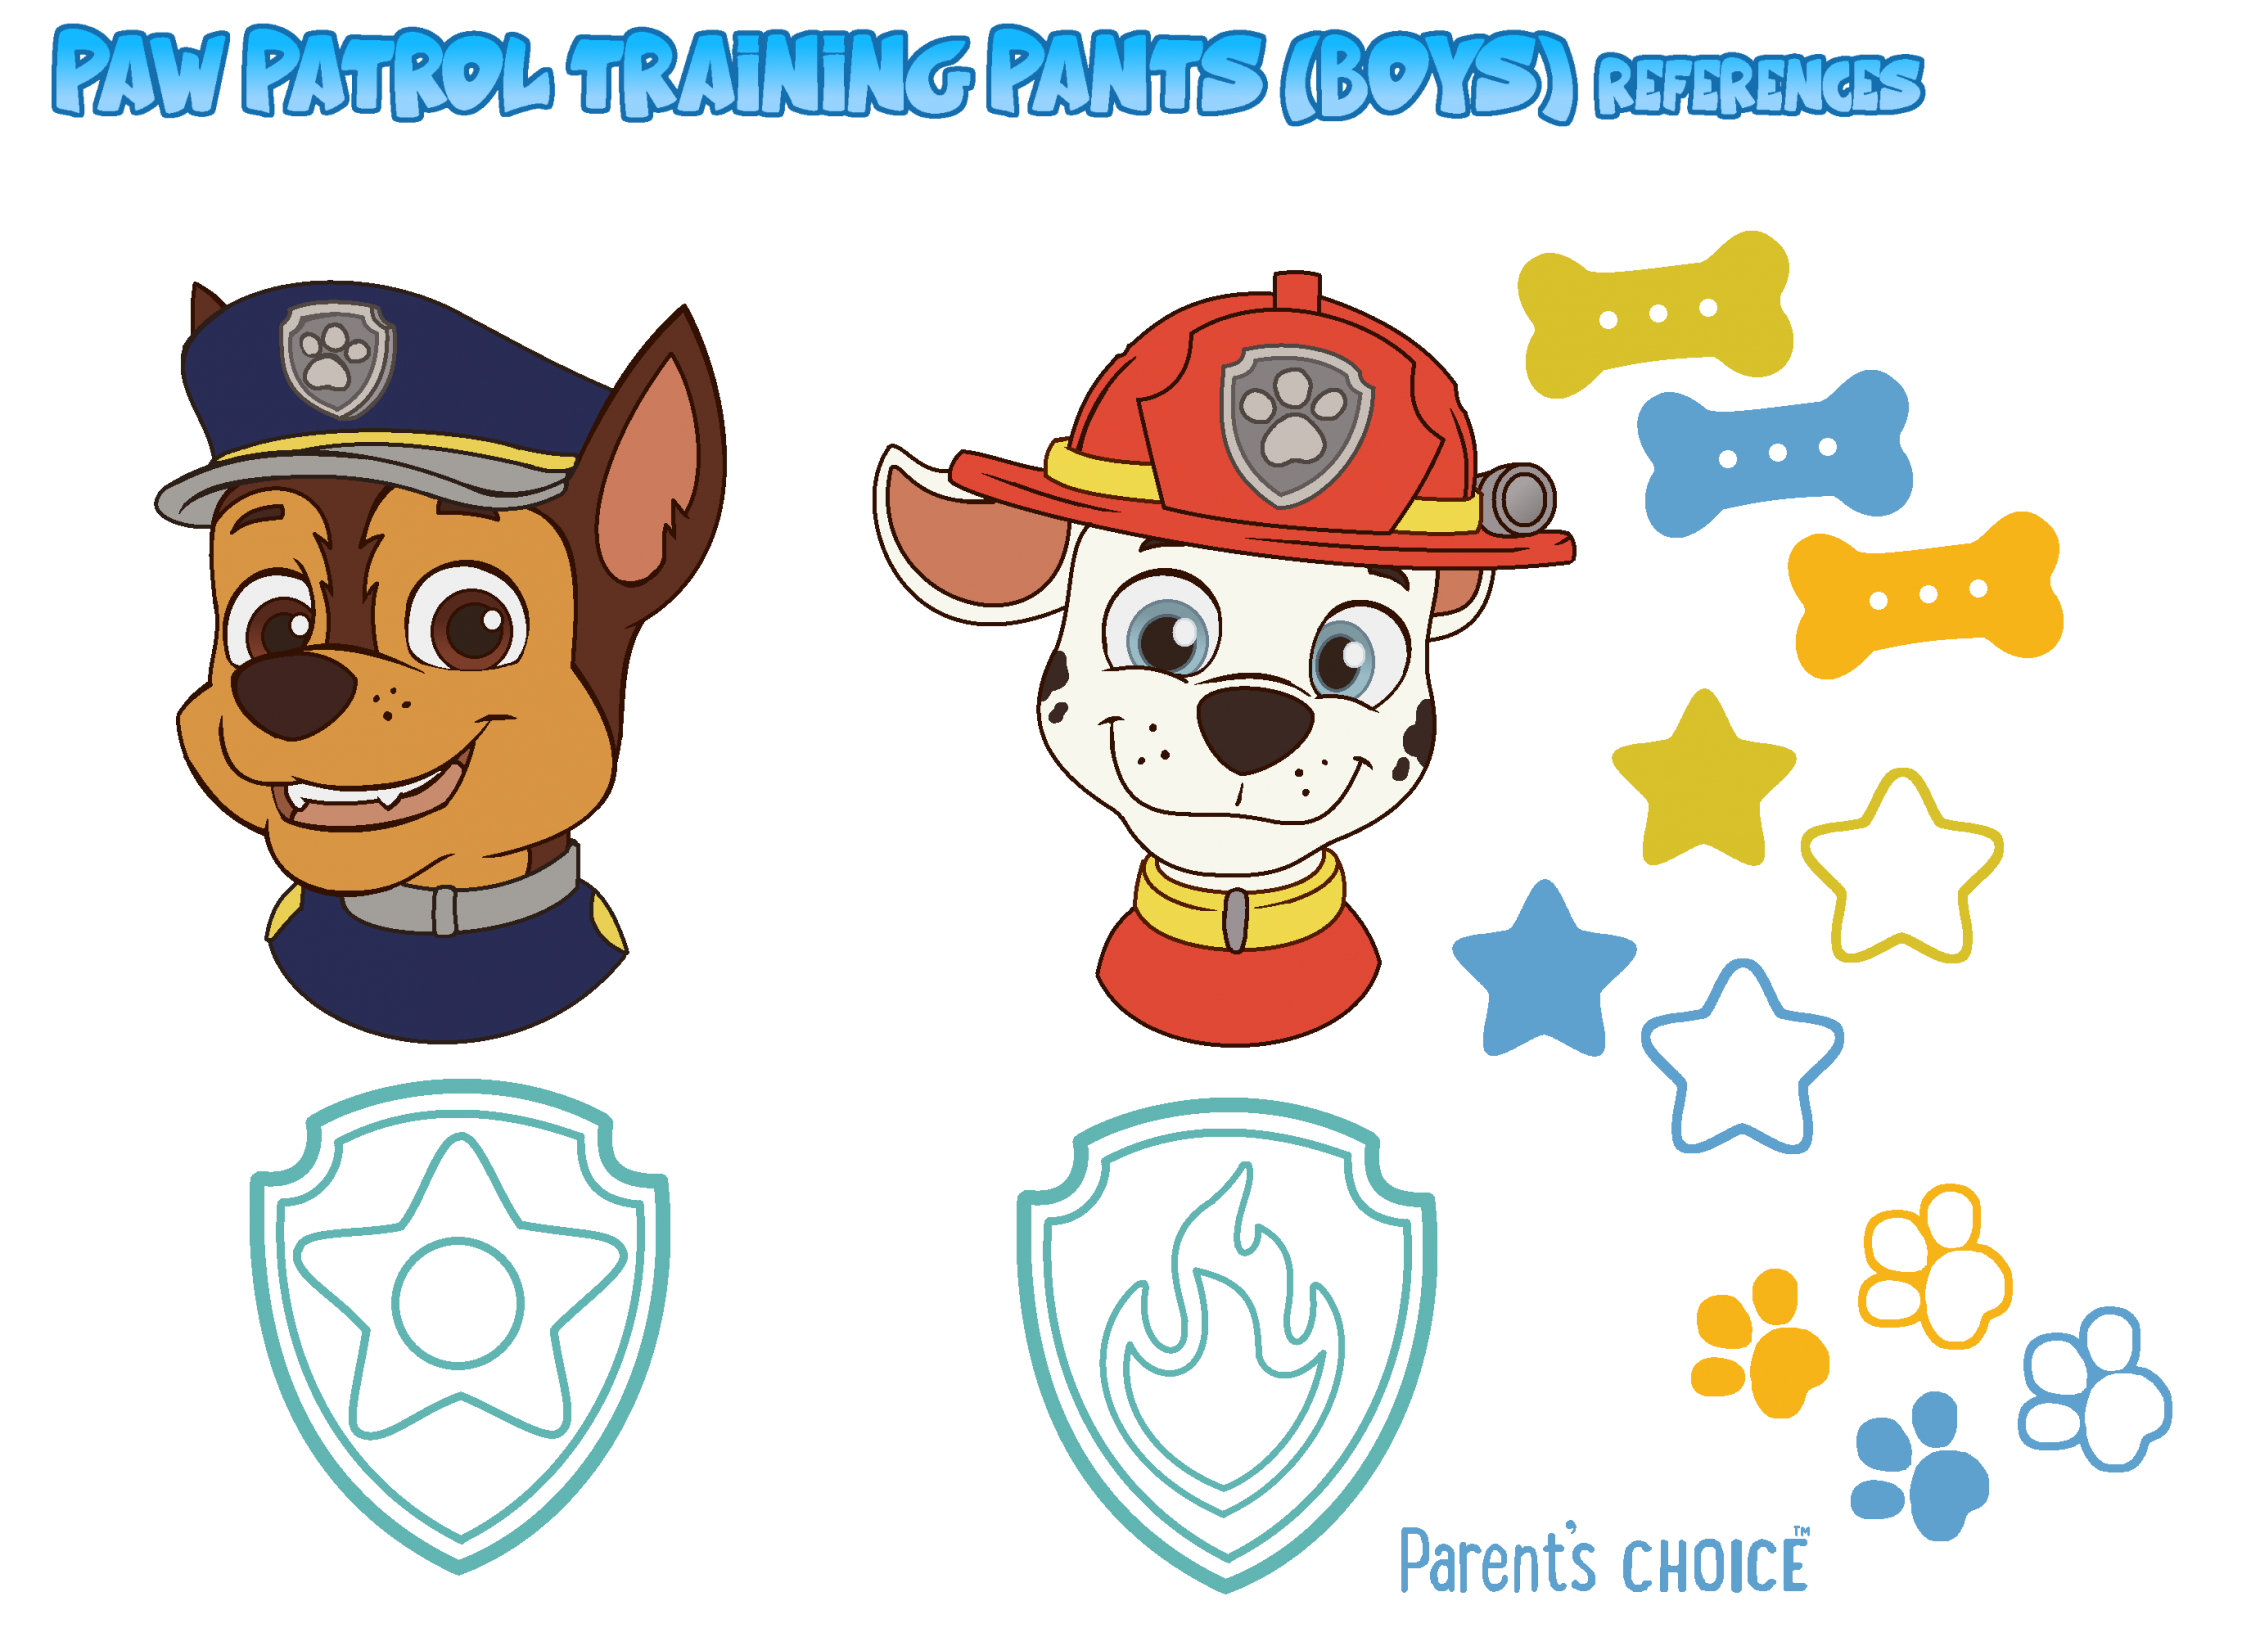 PAW Patrol training pants references (Boys) by yipthecoyotepup